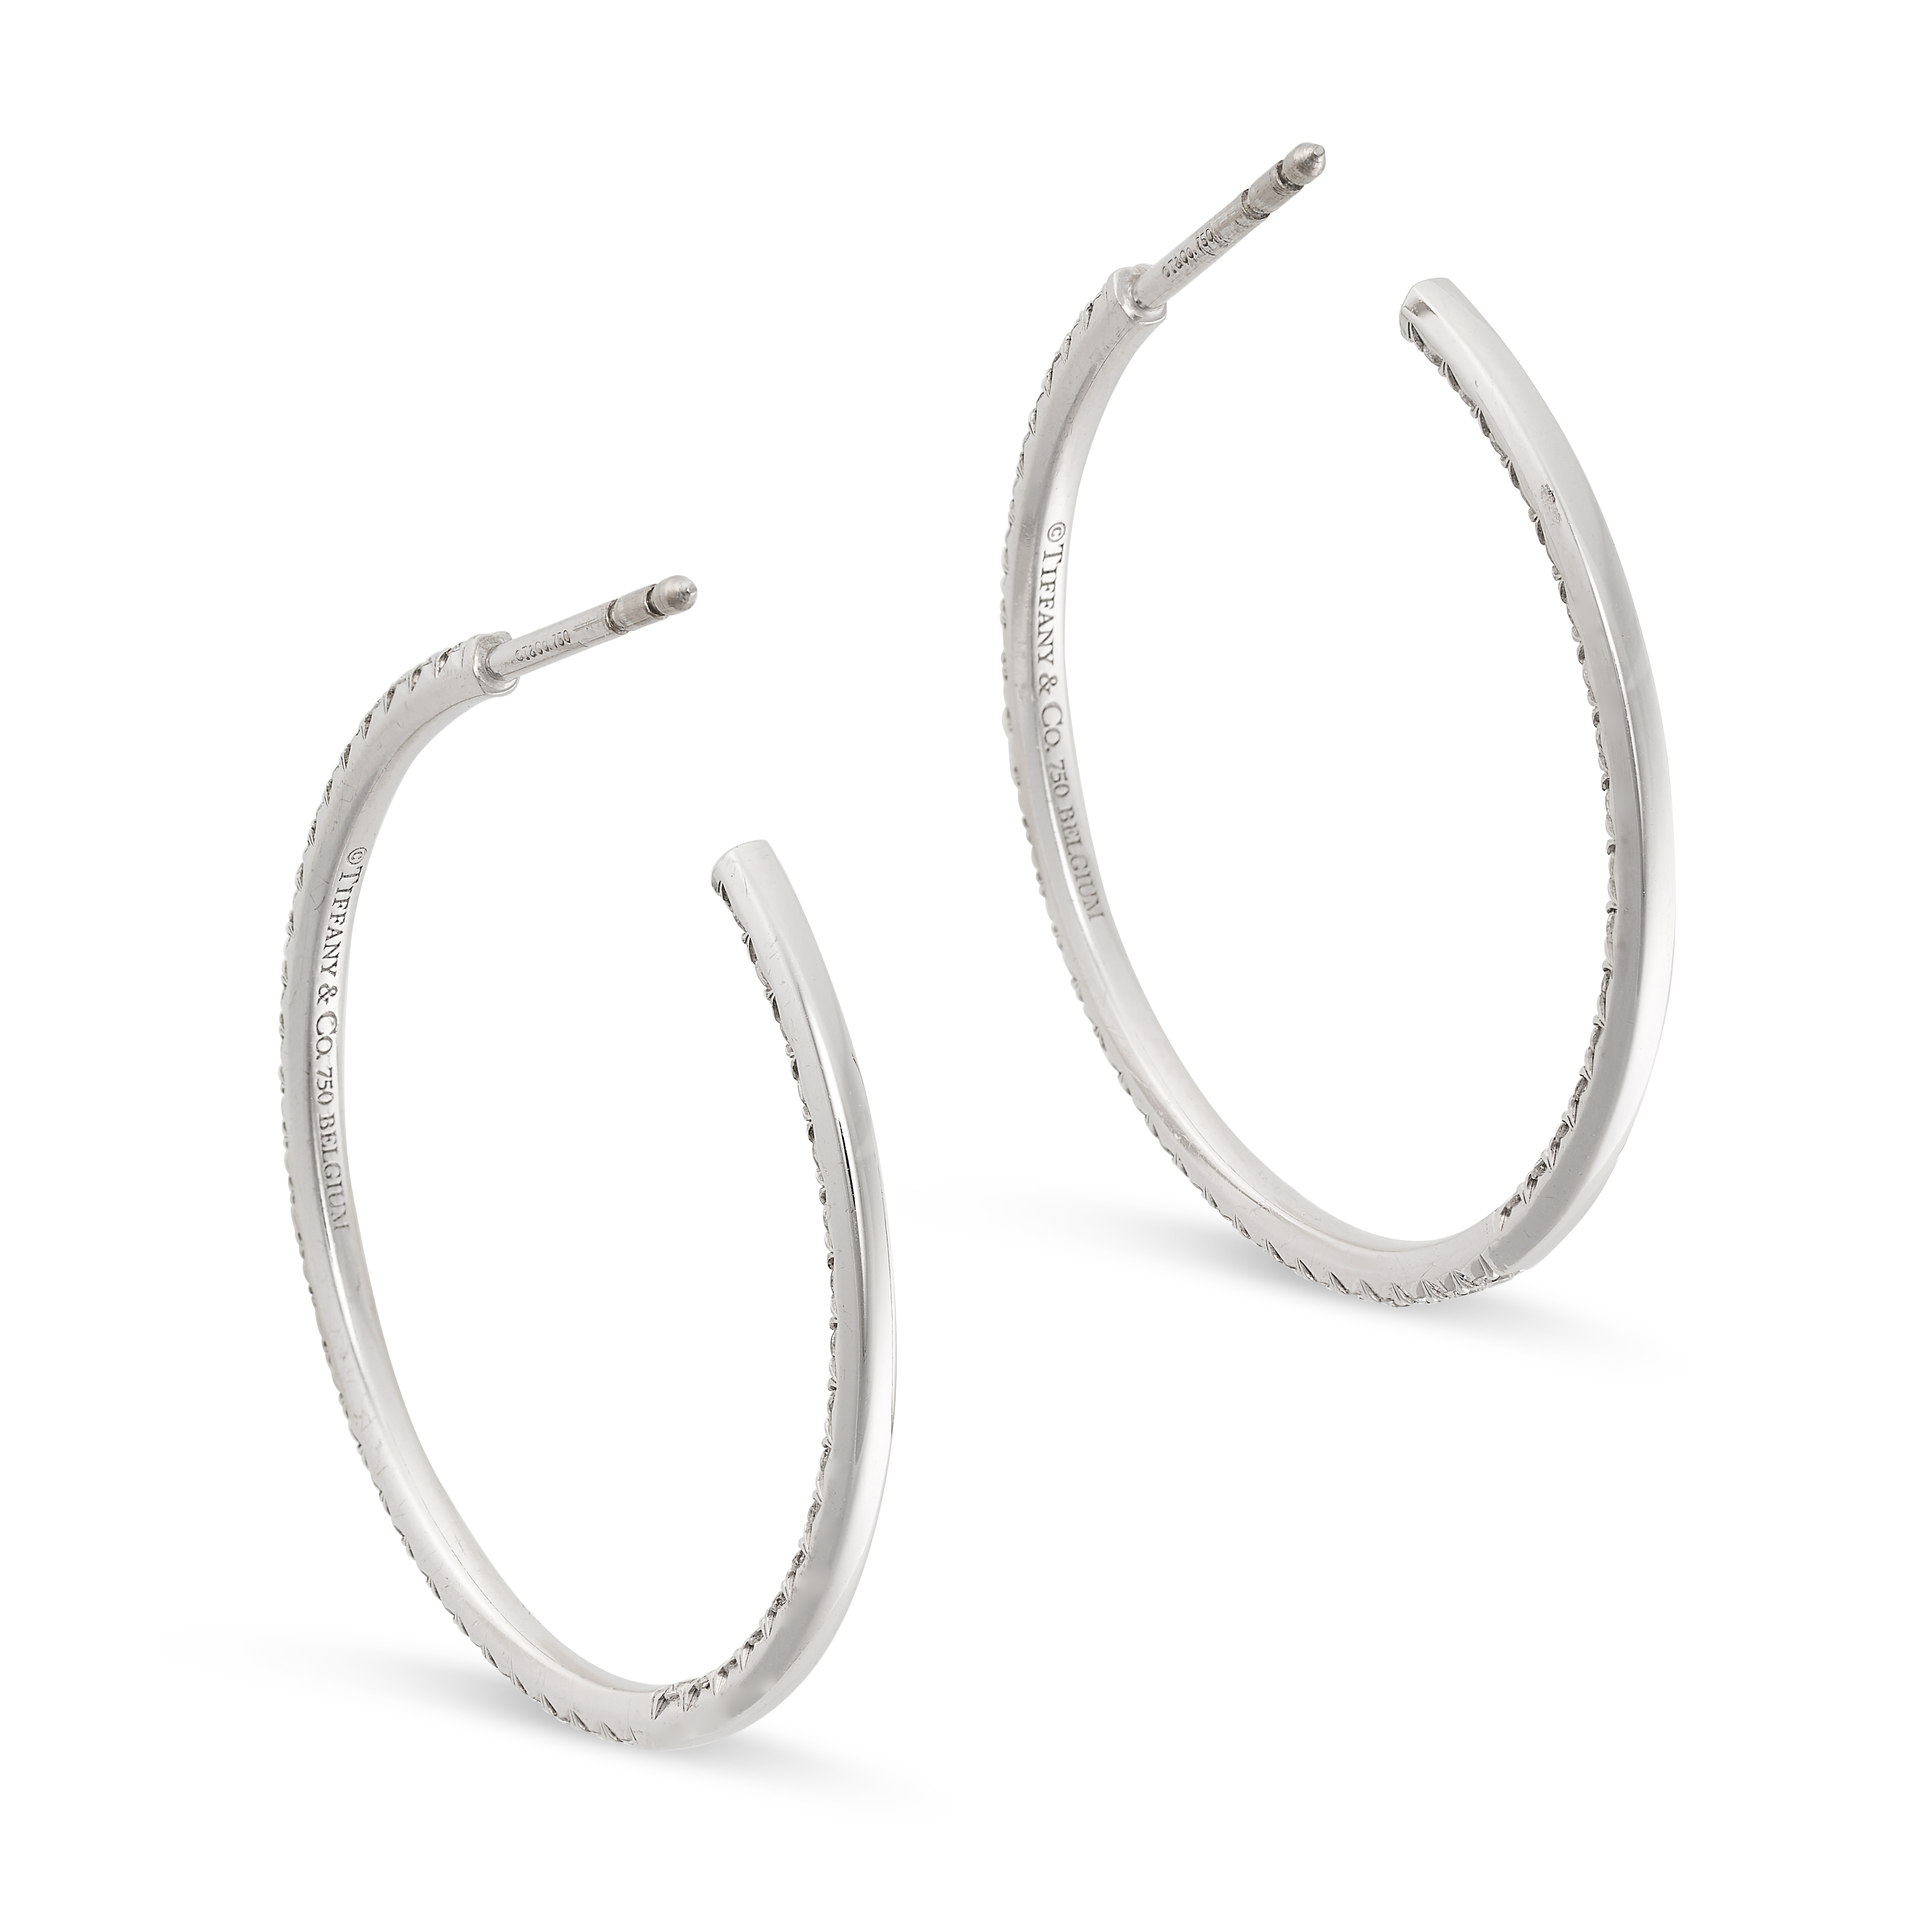 TIFFANY & CO., A PAIR OF DIAMOND HOOP EARRINGS in 18ct white gold, designed as a hoop, set with - Image 2 of 2